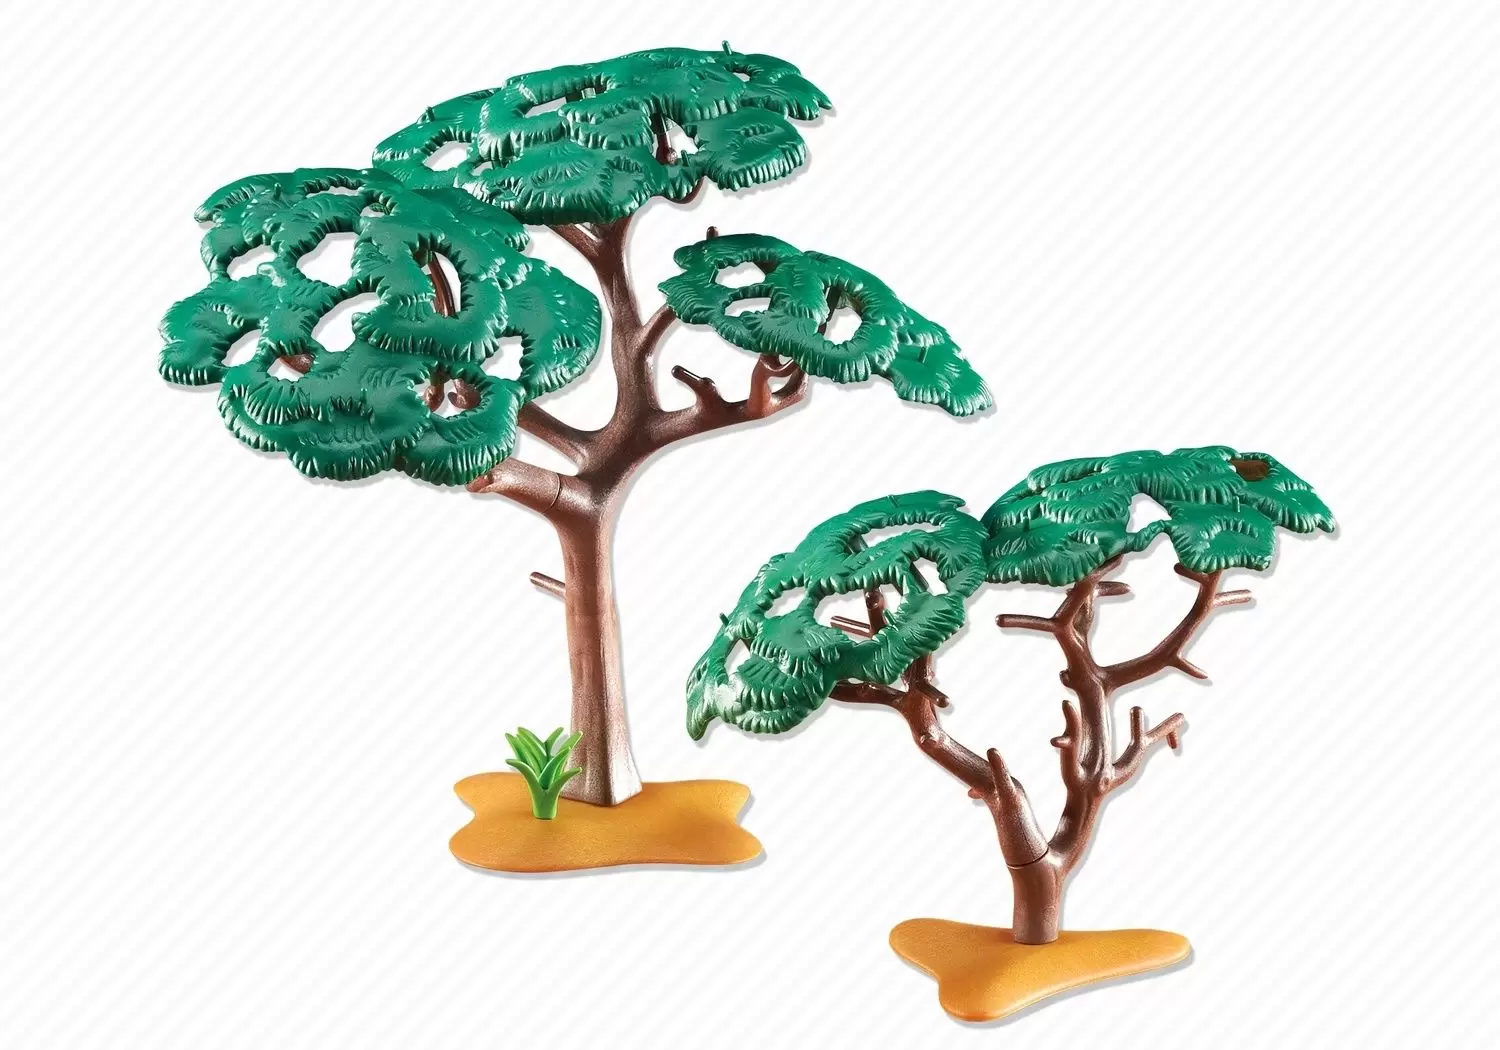 Playmobil Accessories & decorations - African Trees